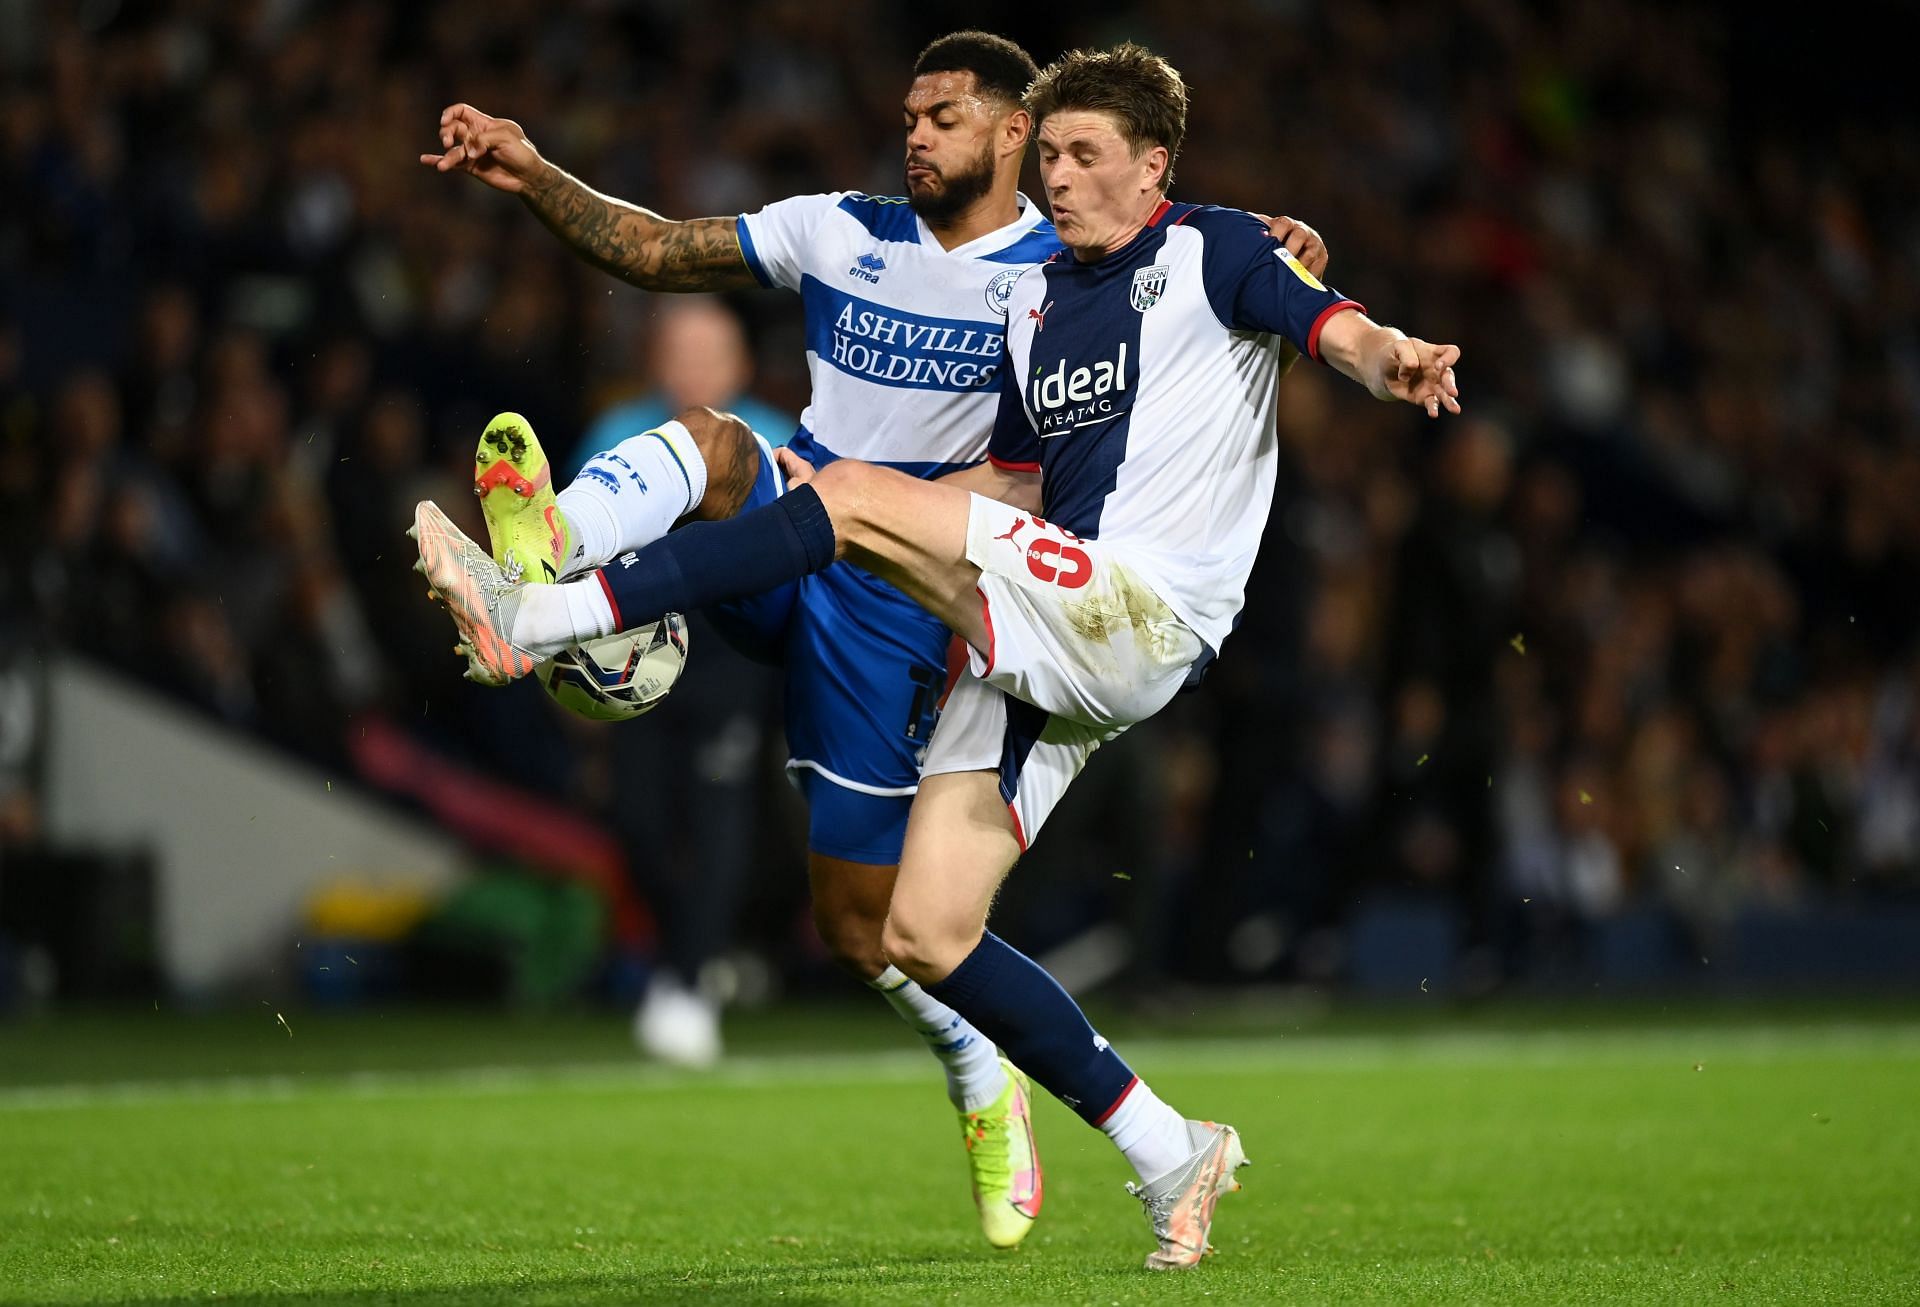 West Bromwich Albion and Queens Park Rangers meet for the 50th time in history